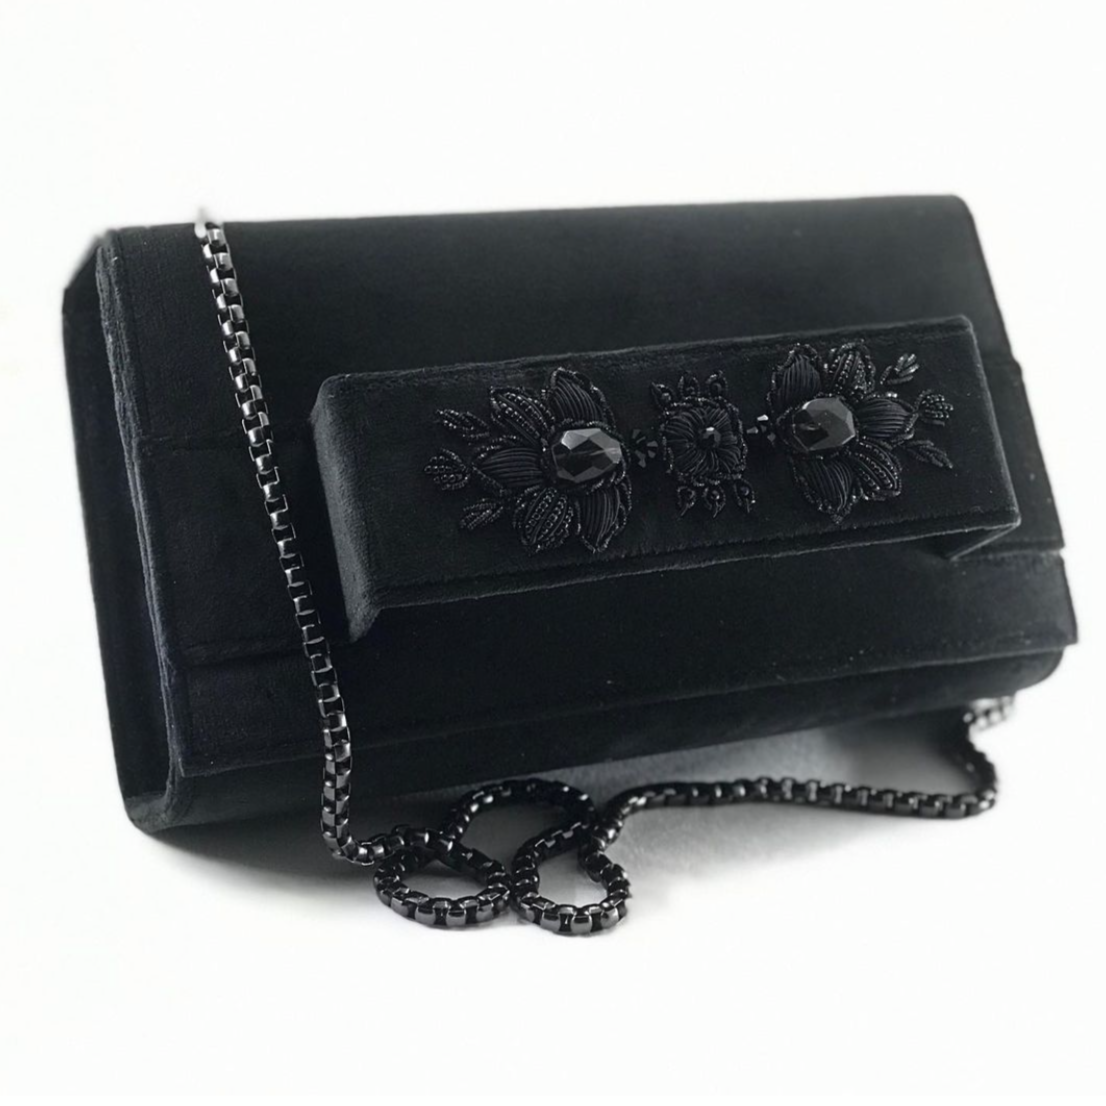 Black velvet clutch with embroidery and beads.